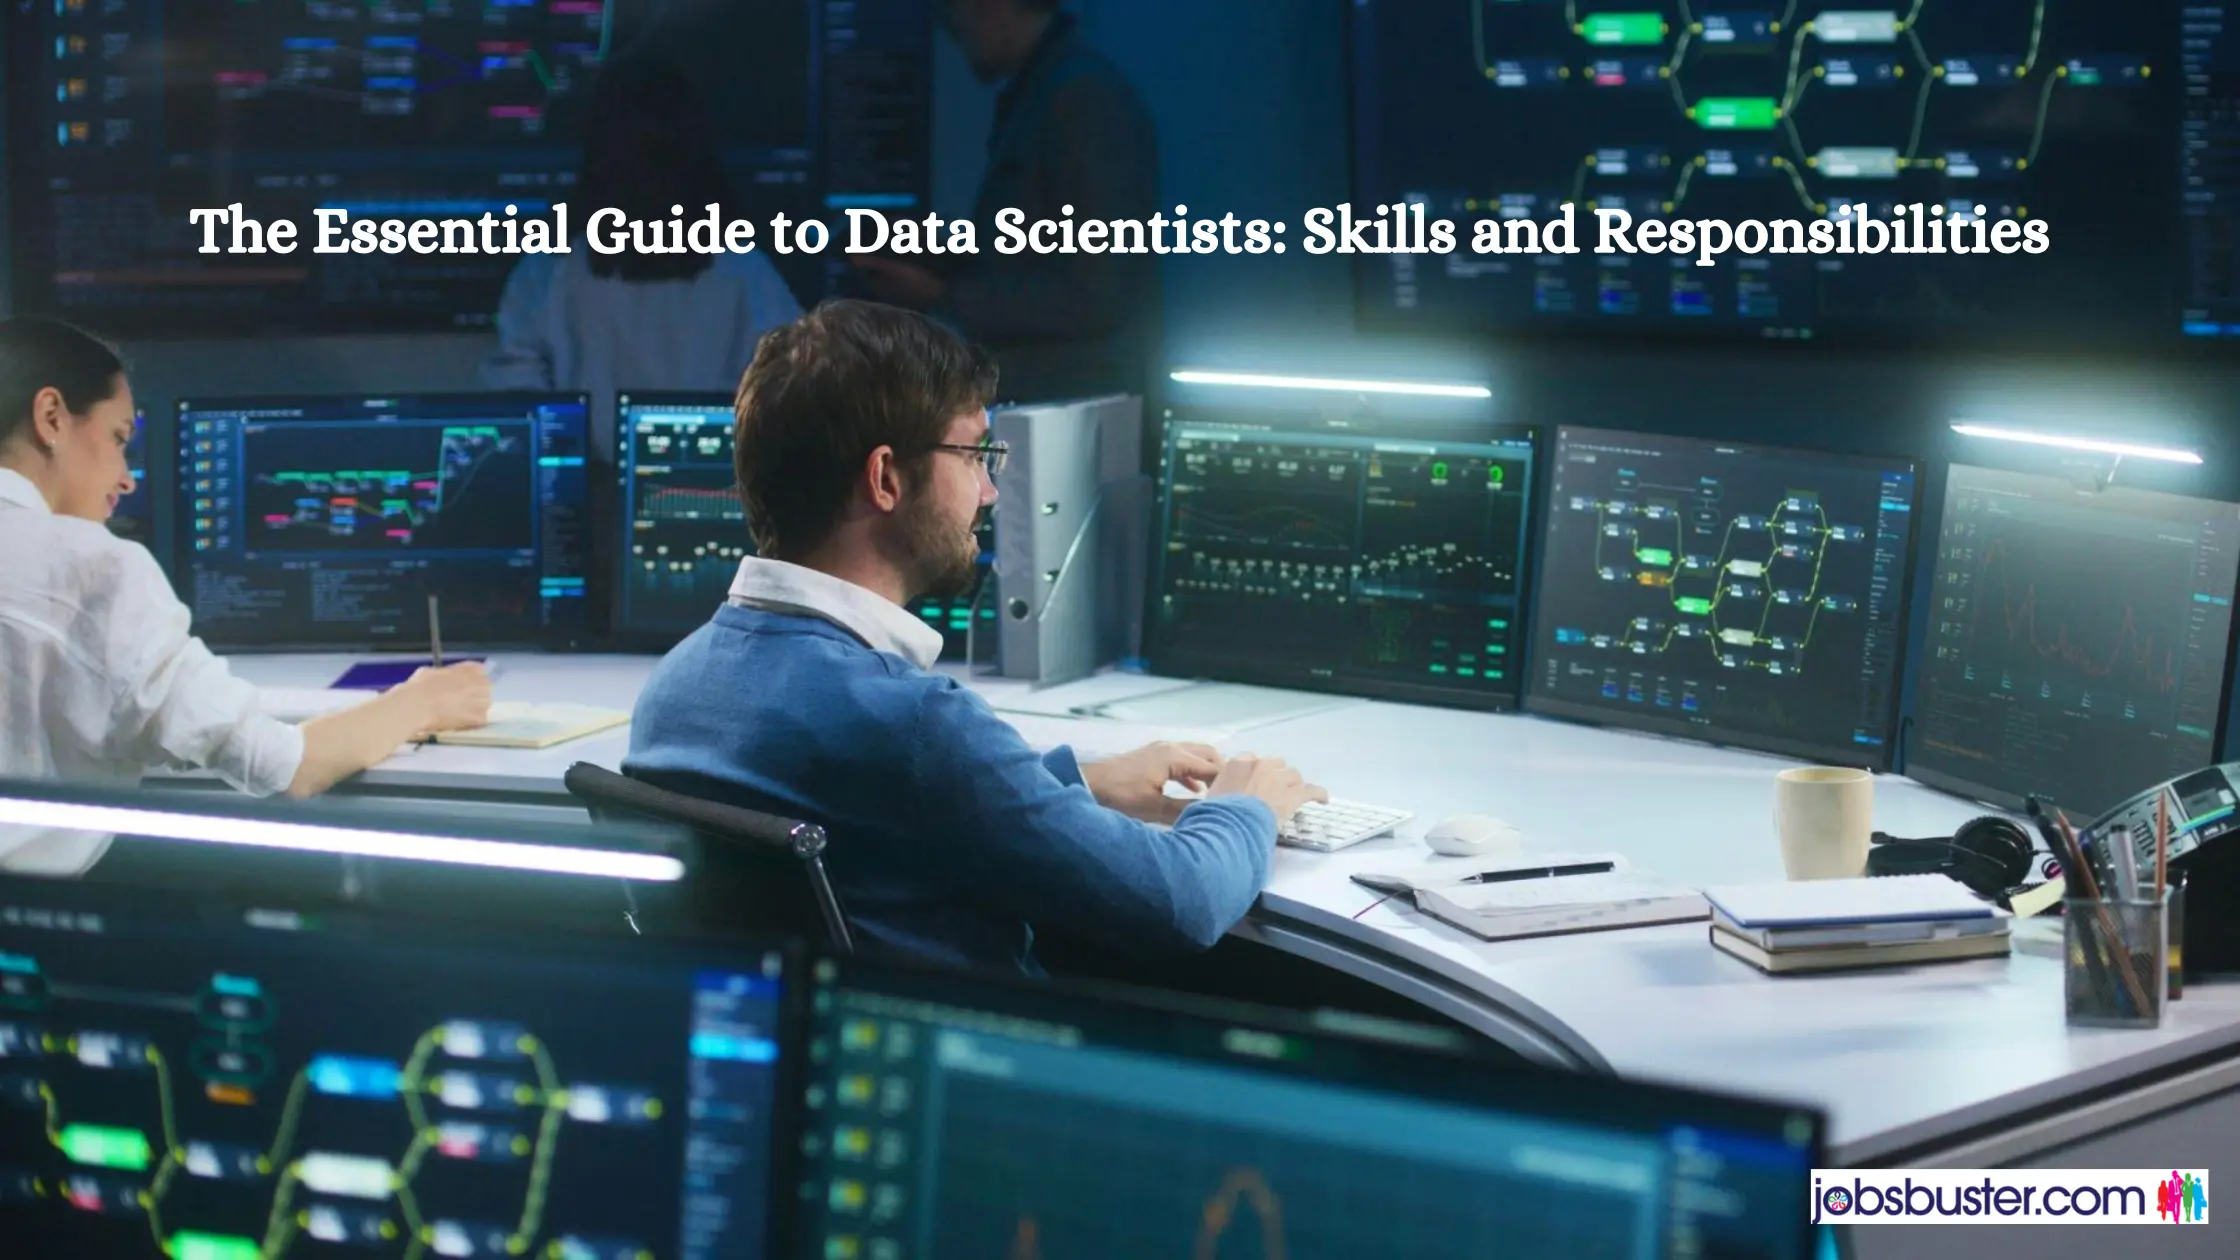 The Essential Guide to Data Scientists: Skills and Responsibilities